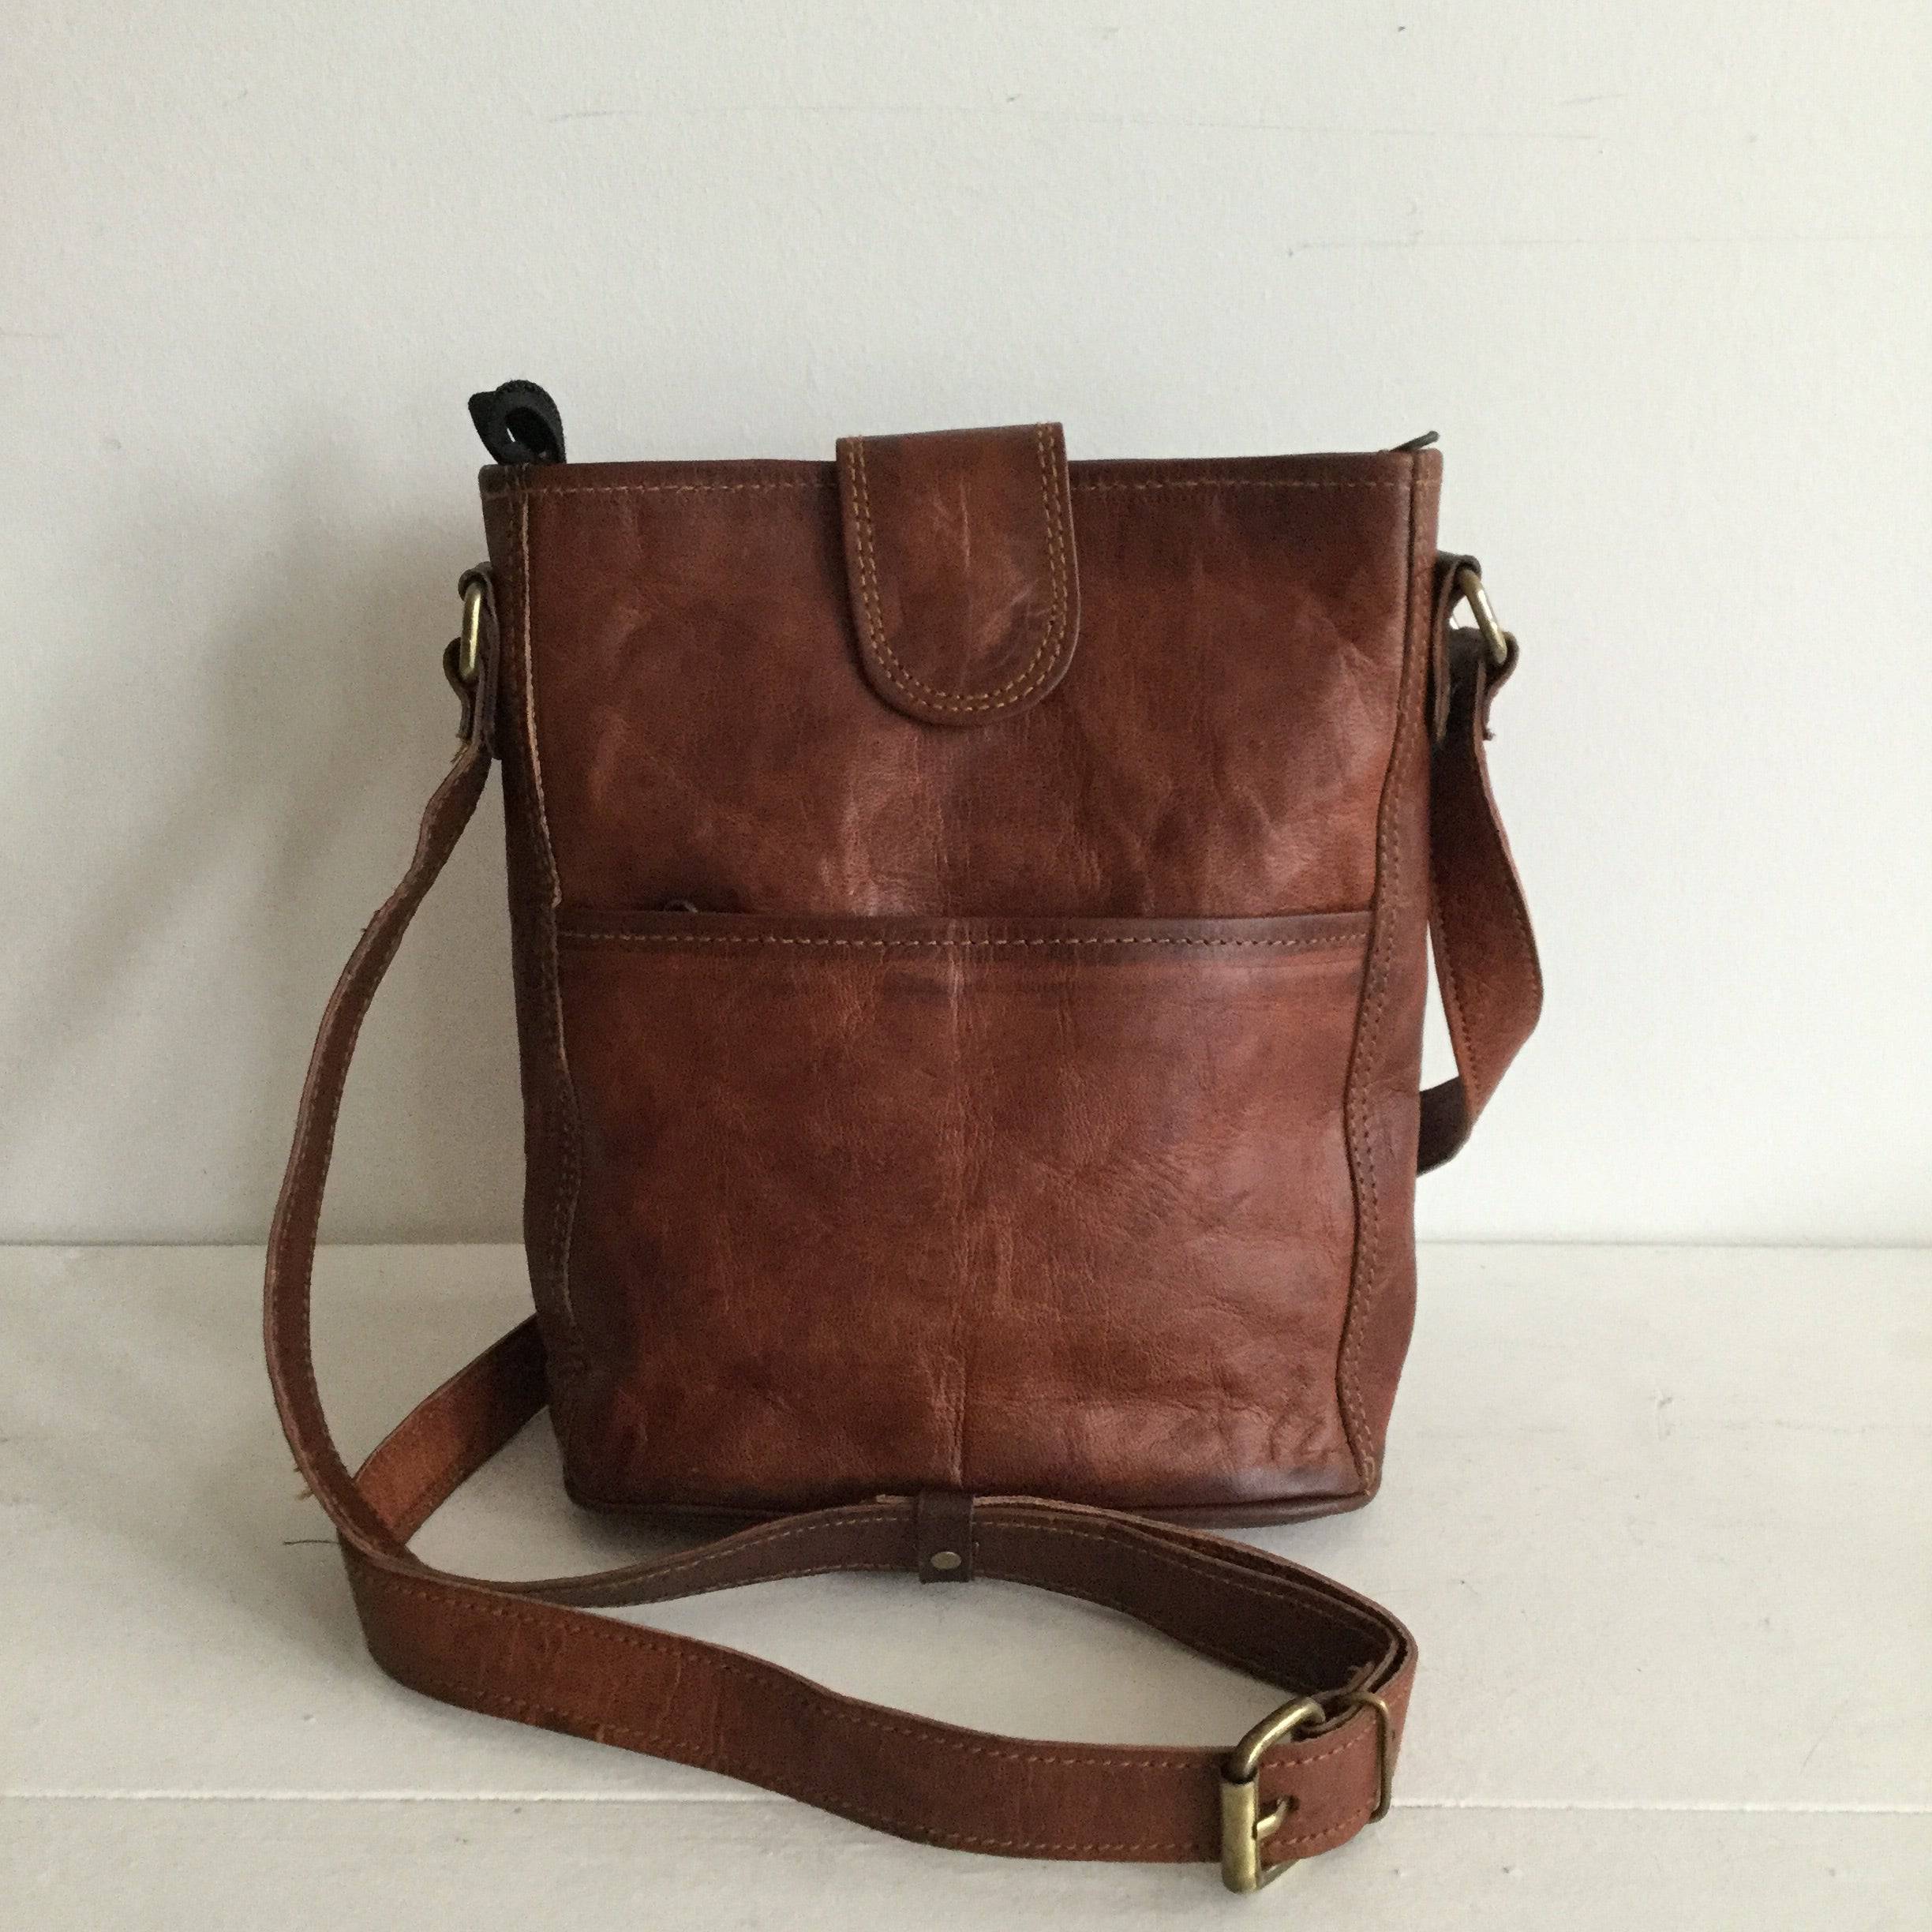 12" LEATHER BUCKET BAG - Out of the Blue